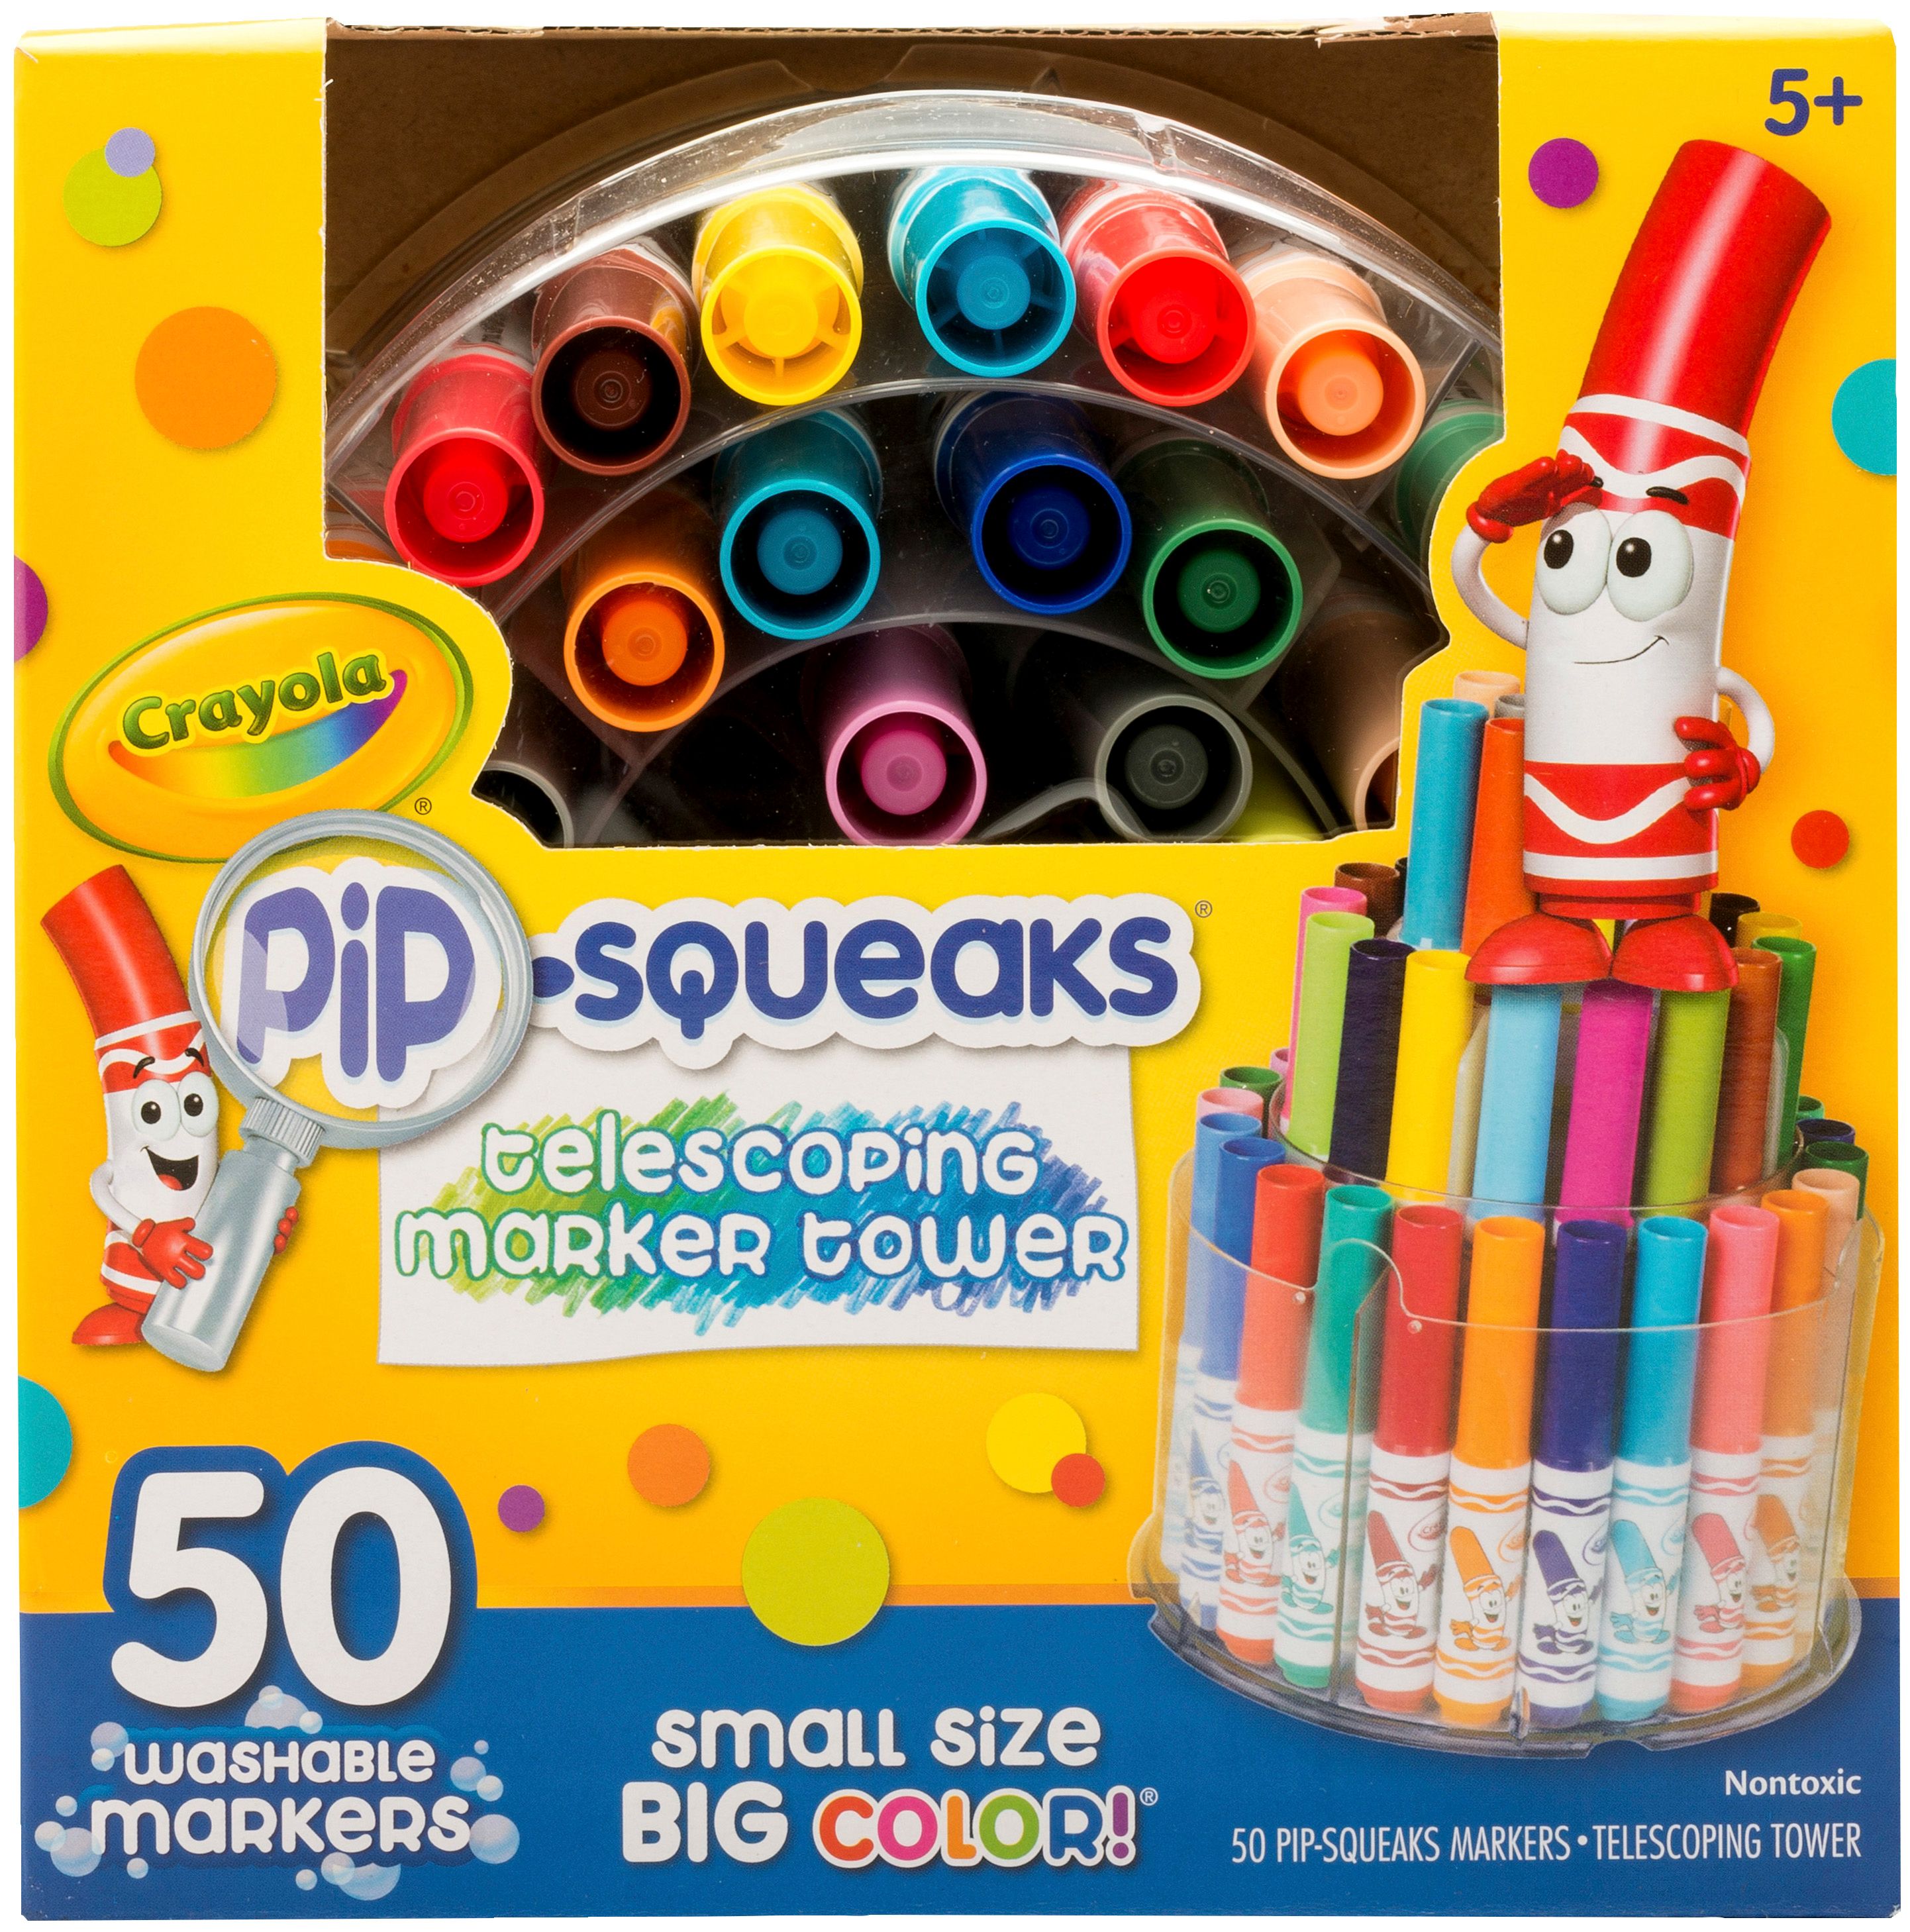 Crayola Pip Squeaks Marker Tower, Assorted Colors, 50 Washable Markers, Toys for Kids - image 2 of 6